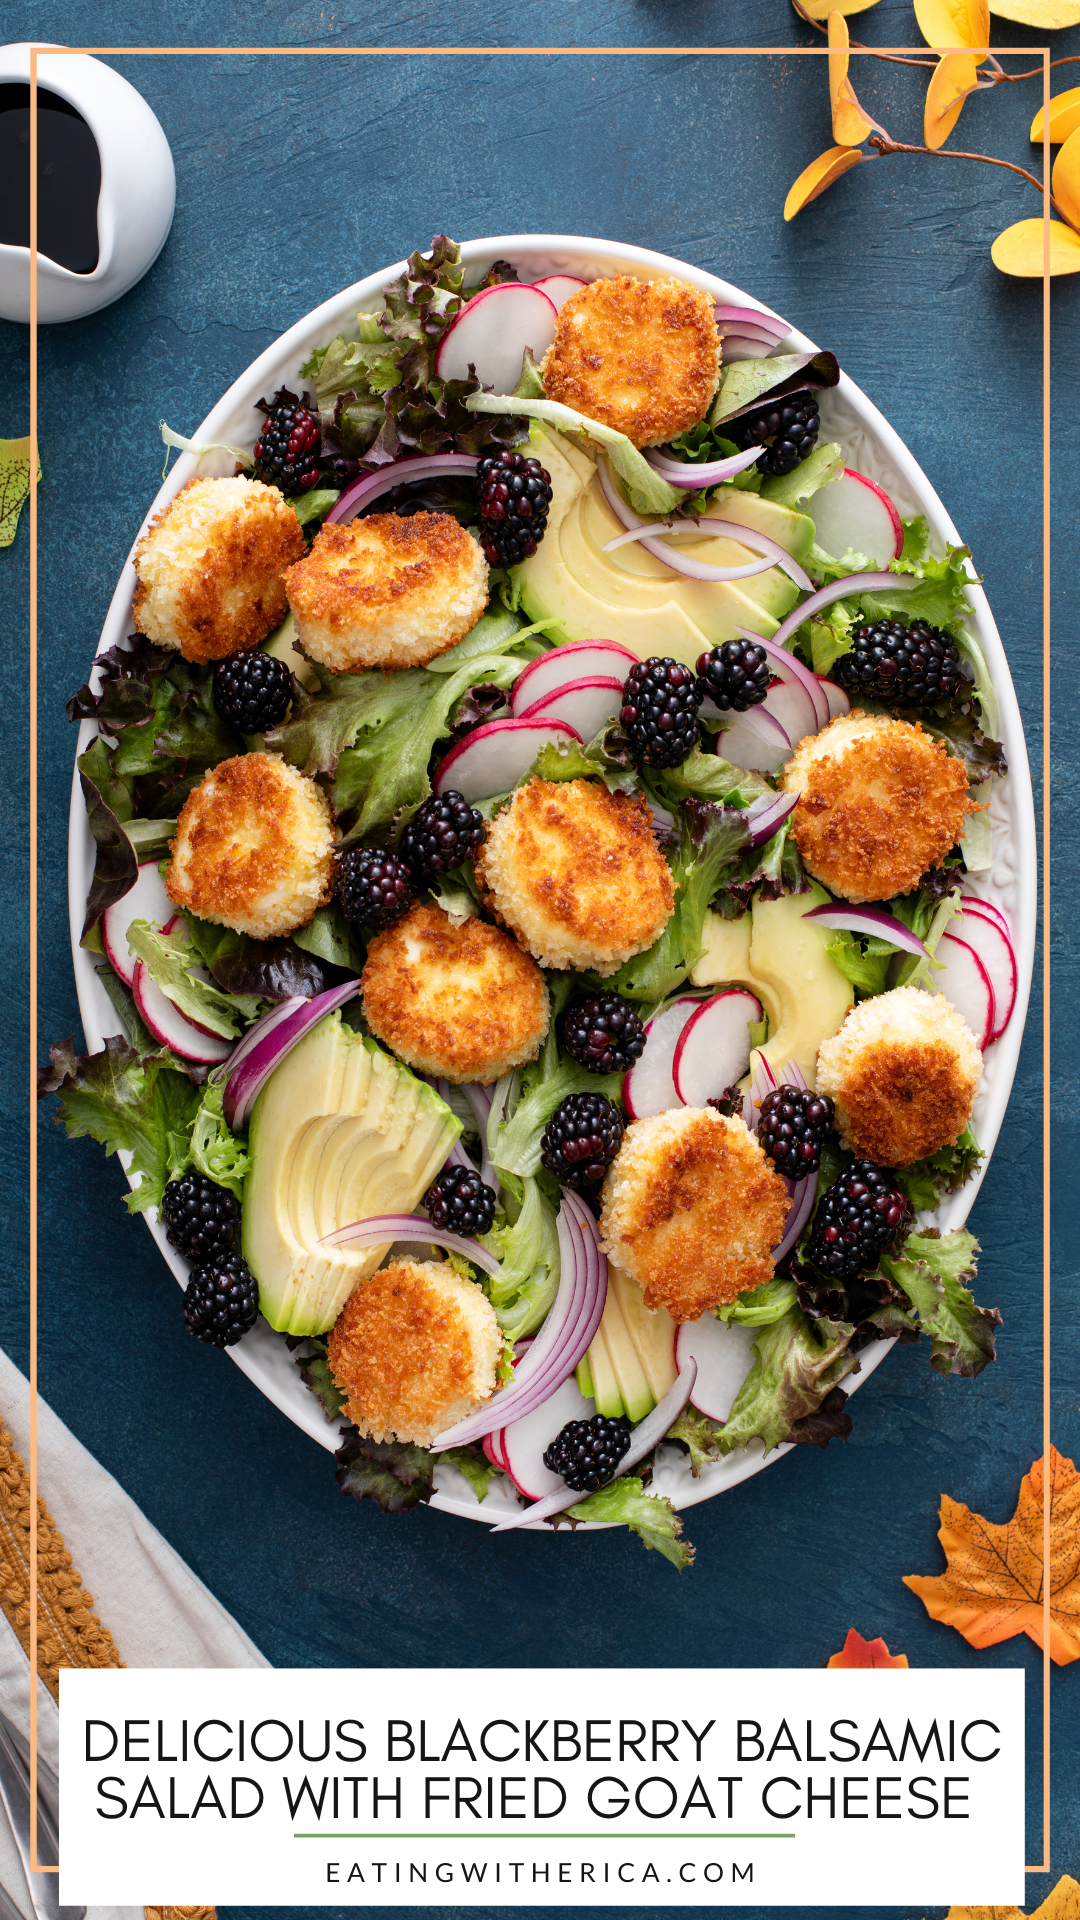 The perfect dinner salad recipe ever. Equal part sweet and savory this blackberry balsamic salad with fried goat cheese balls is to die for. Click here to make it!  